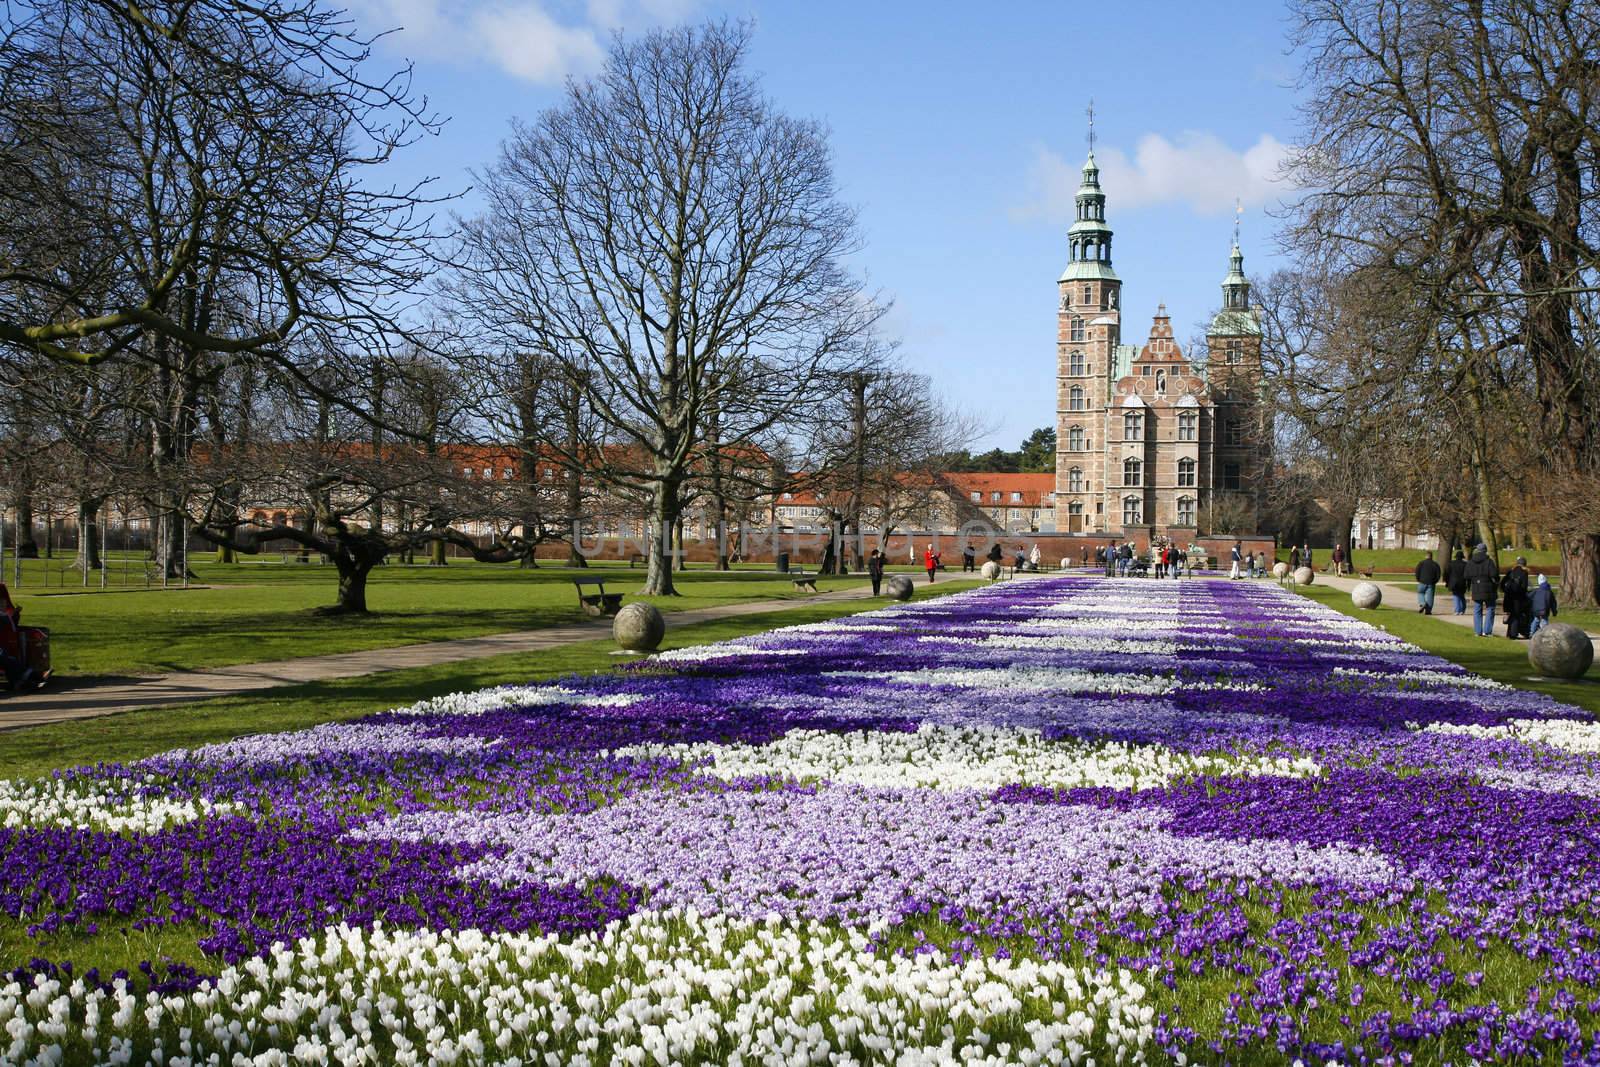 Rosenborg Castle which is a renaissance castle in the center of Copenhagen. It was built in 1606 and is an example of Christian IV's architectural projects. Here seen at springtime.